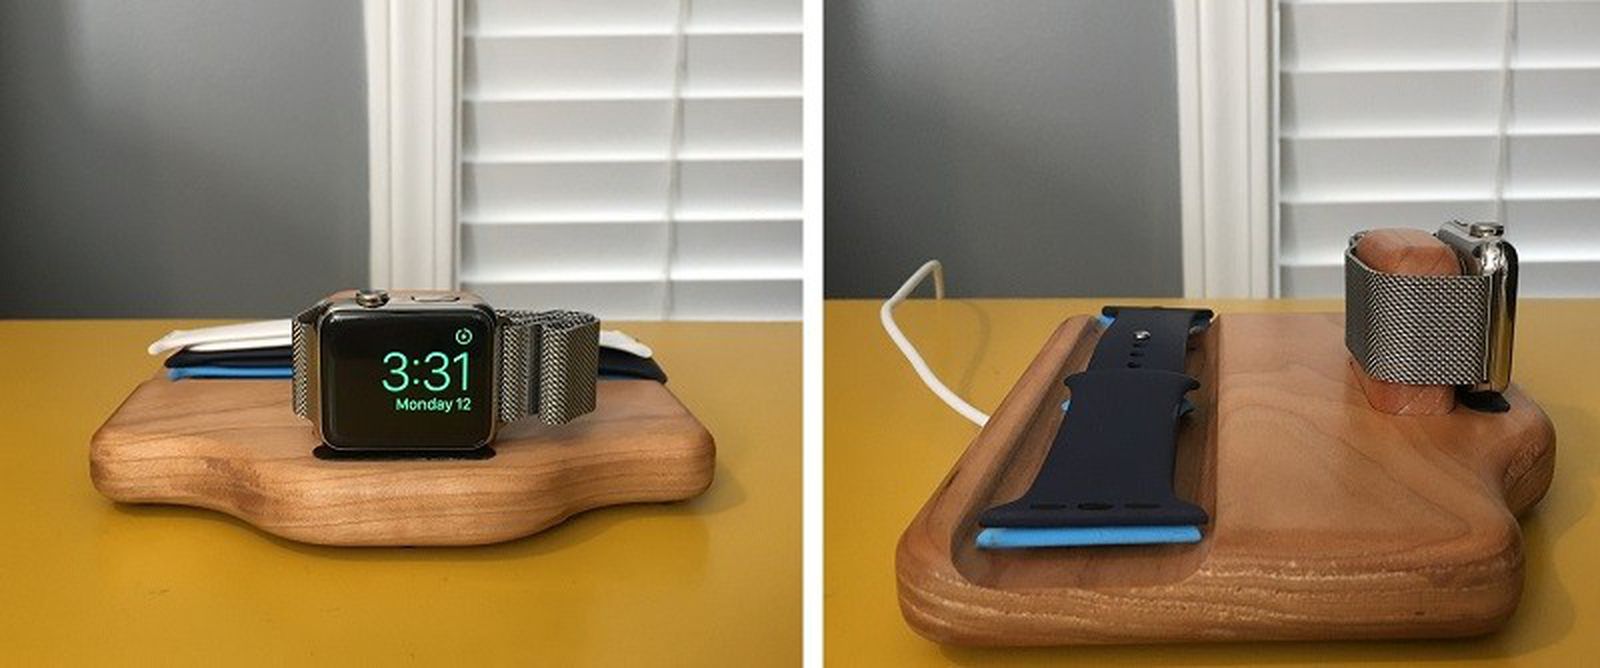 Pad & Quill Review: Timber Catchall and Nightstand Provide Elegant Apple Watch Charging Solutions - MacRumors